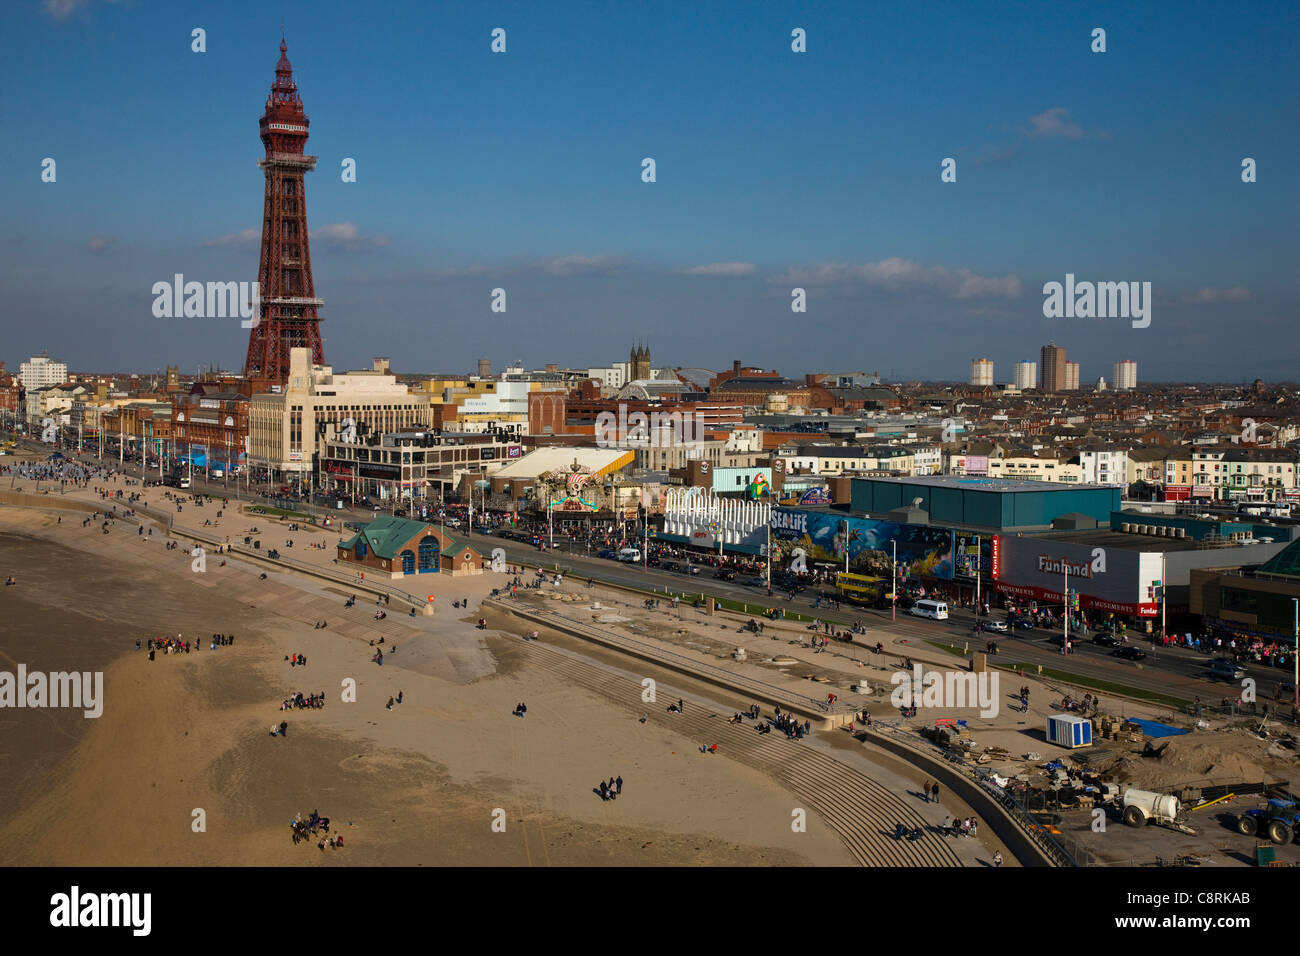 Blackpool tower, sea front and town view Stock Photo